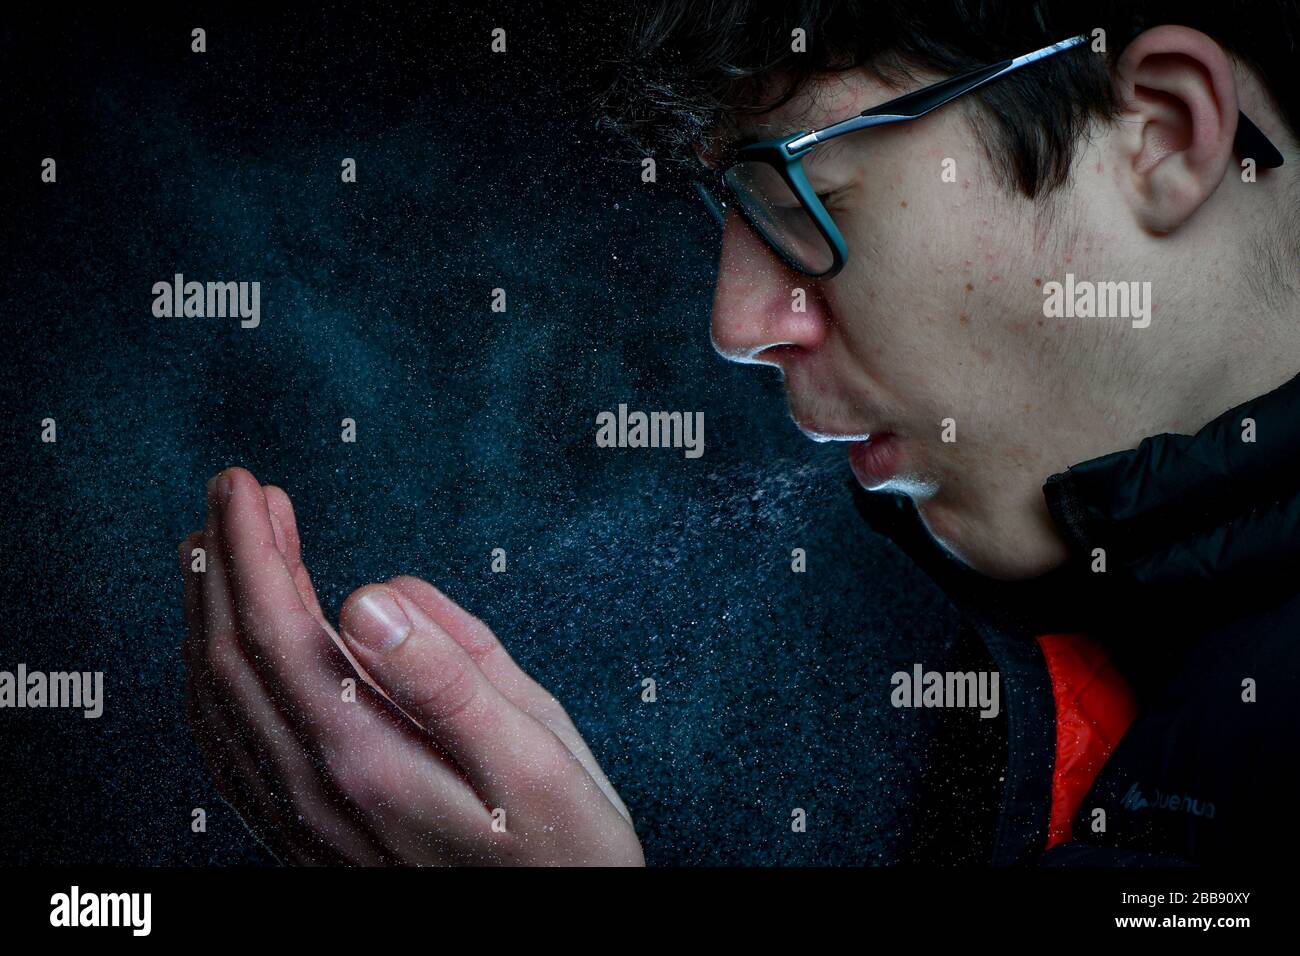 A teenage boy sneezing / coughing showing the amount of spray or virus that comes out of the mouth. Concept image to show how bacteria spreads. Stock Photo